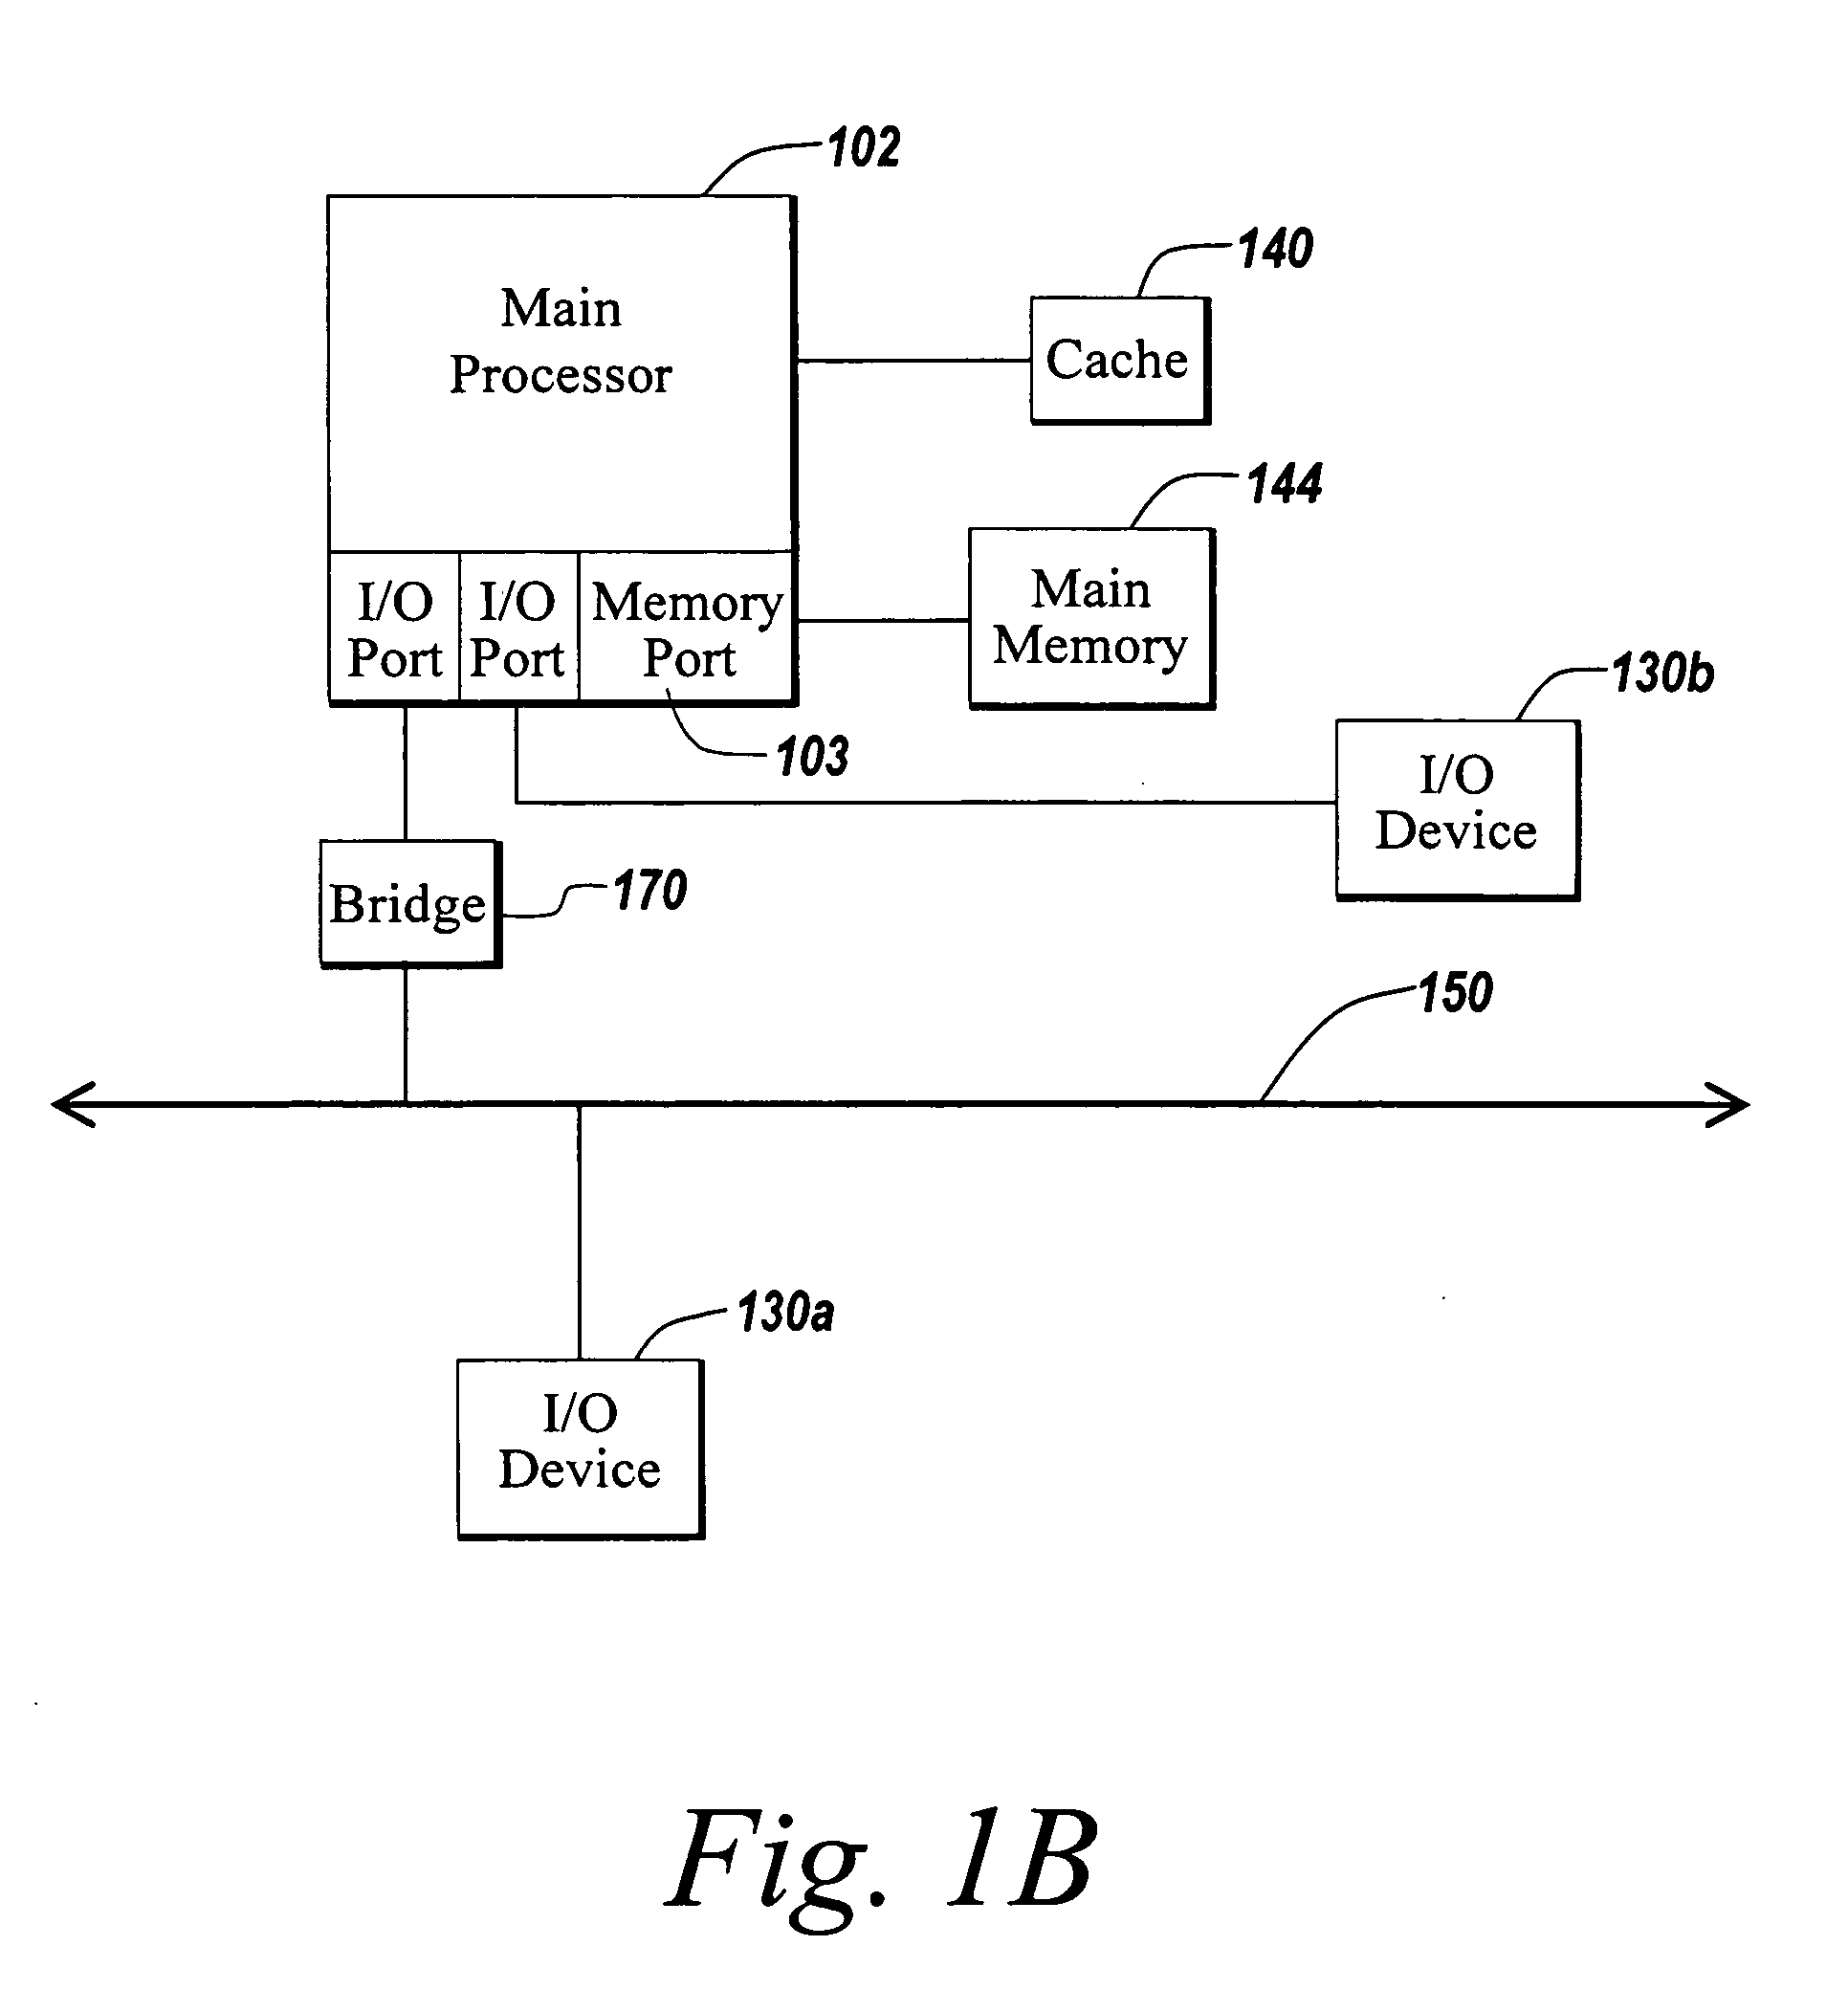 Systems and methods for providing client-side accelerated access to remote applications via TCP multiplexing